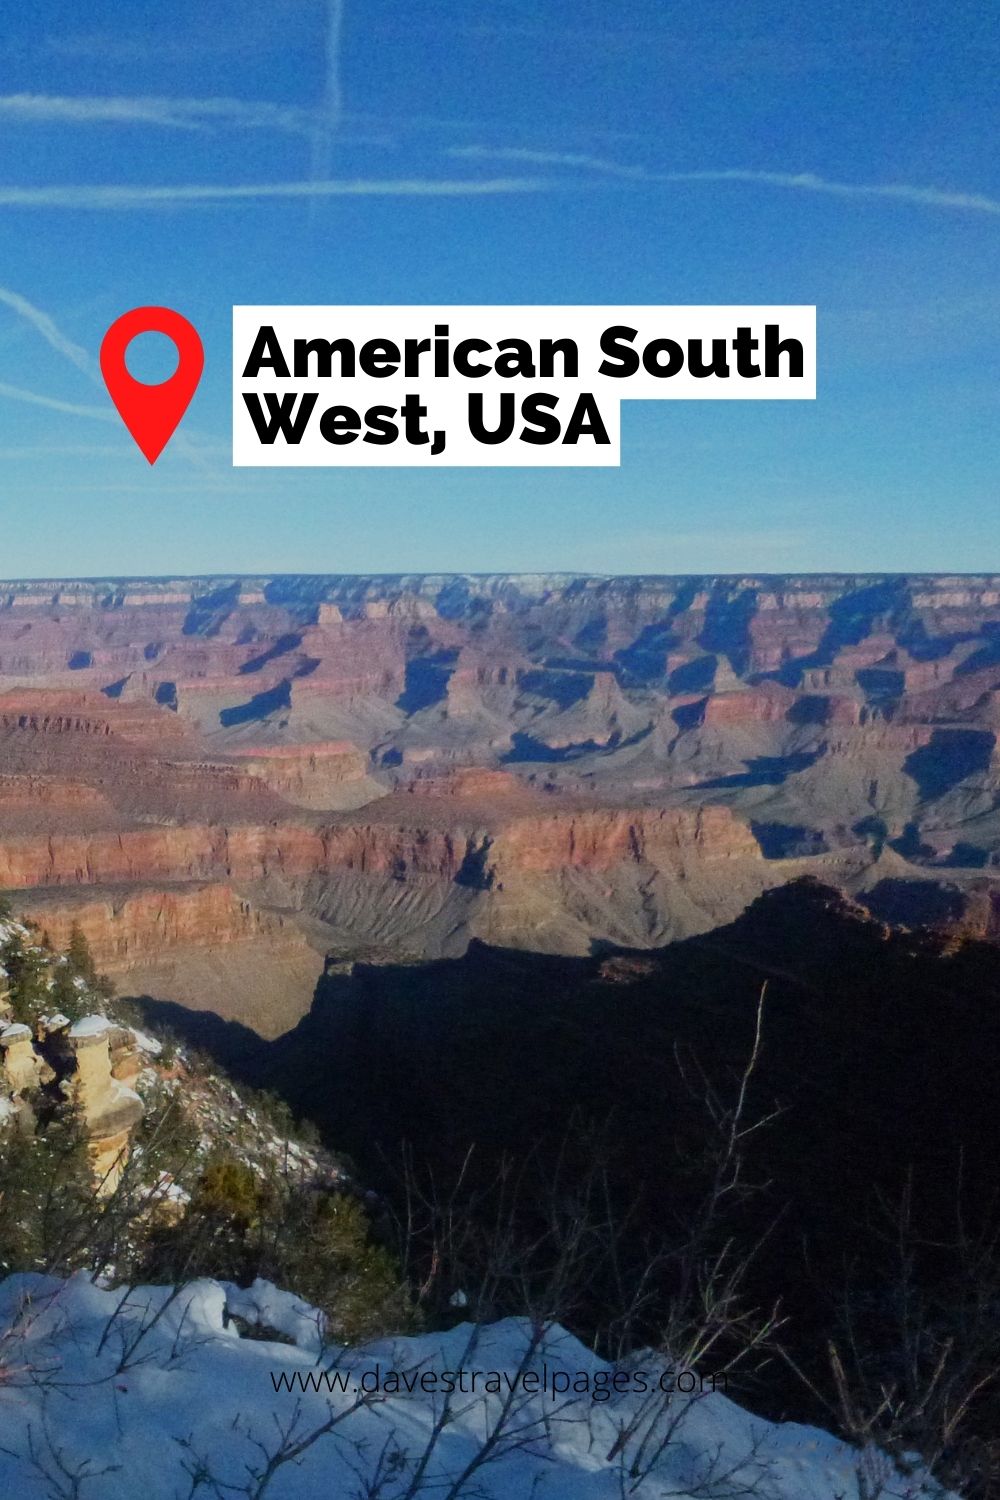 American South West, USA